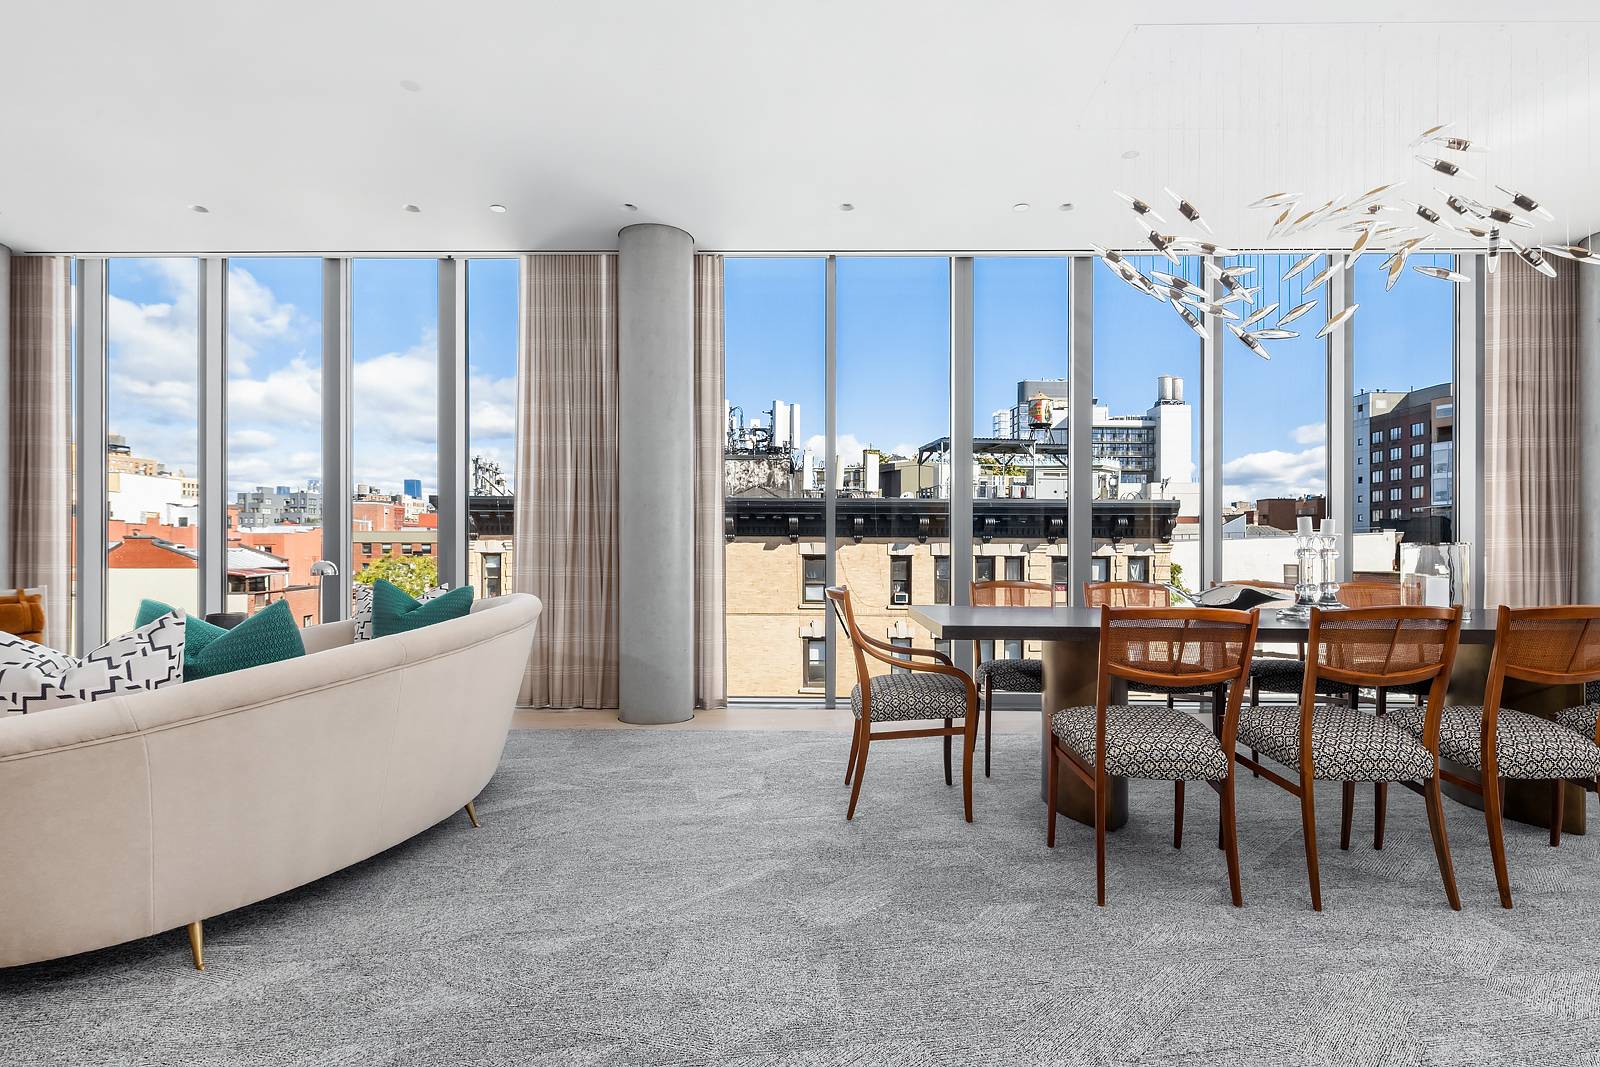 The Penthouse at 152 Elizabeth Masterful design and modern luxury are exquisitely embodied at the 4 bedroom, 4.